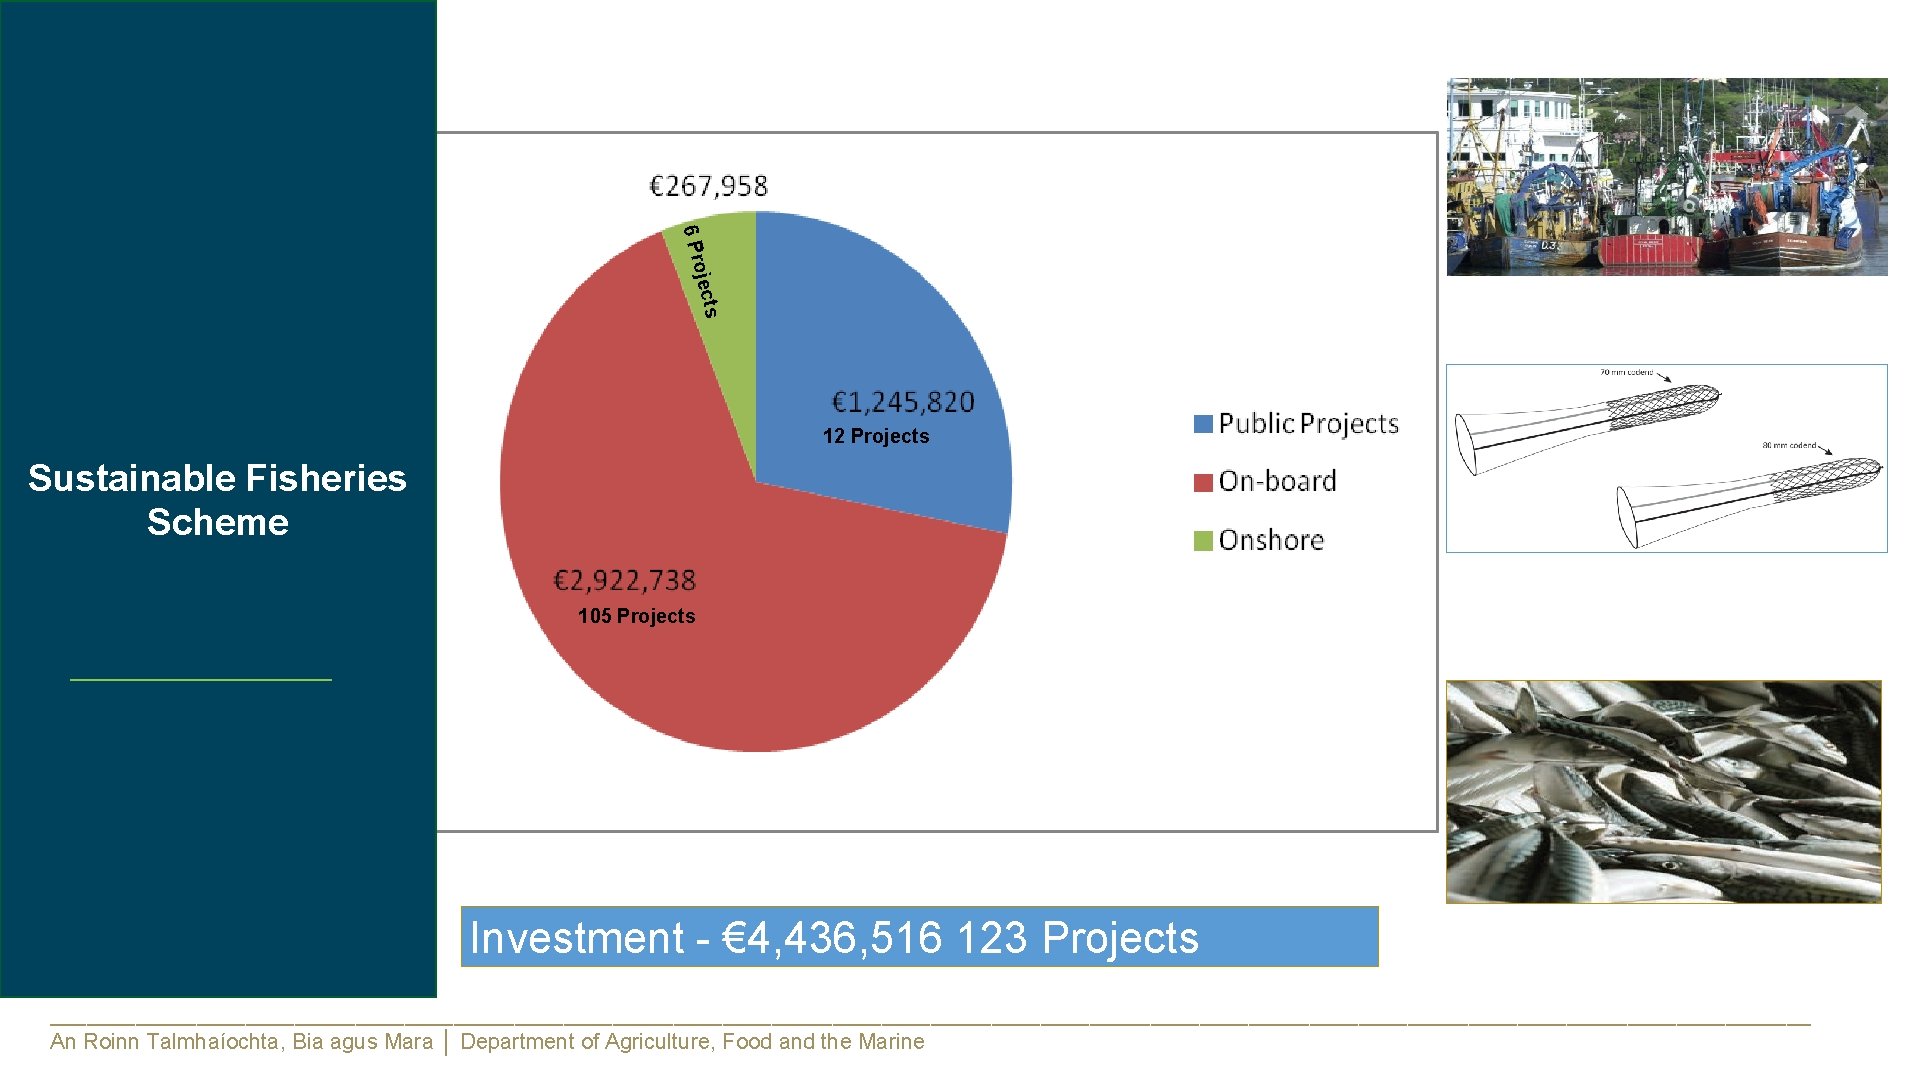 jects 6 Pro 12 Projects Sustainable Fisheries Scheme 105 Projects Investment - € 4,